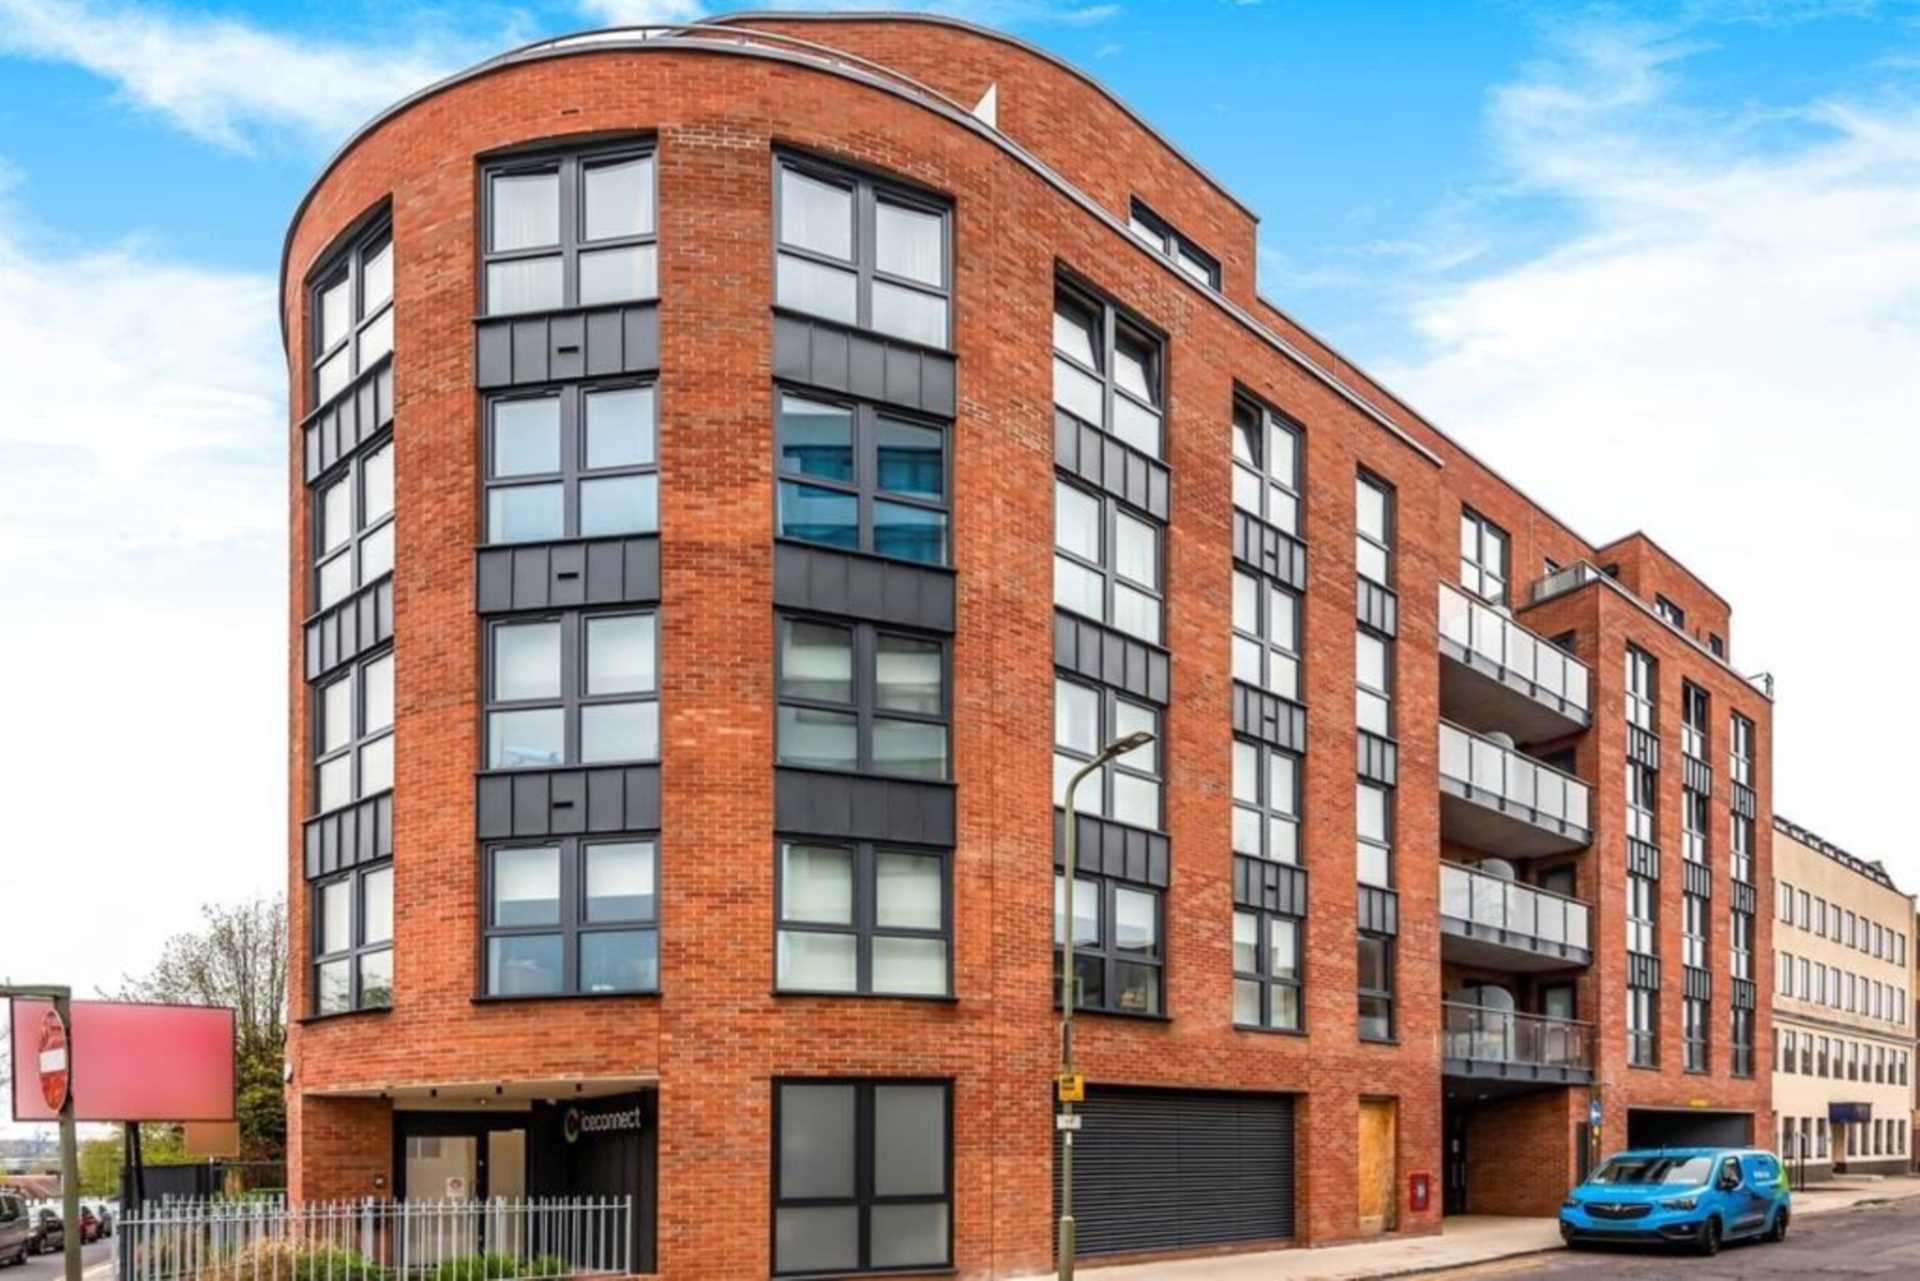 3 bed flat for sale | Nether Street, Finchley, London N3 Picure-1